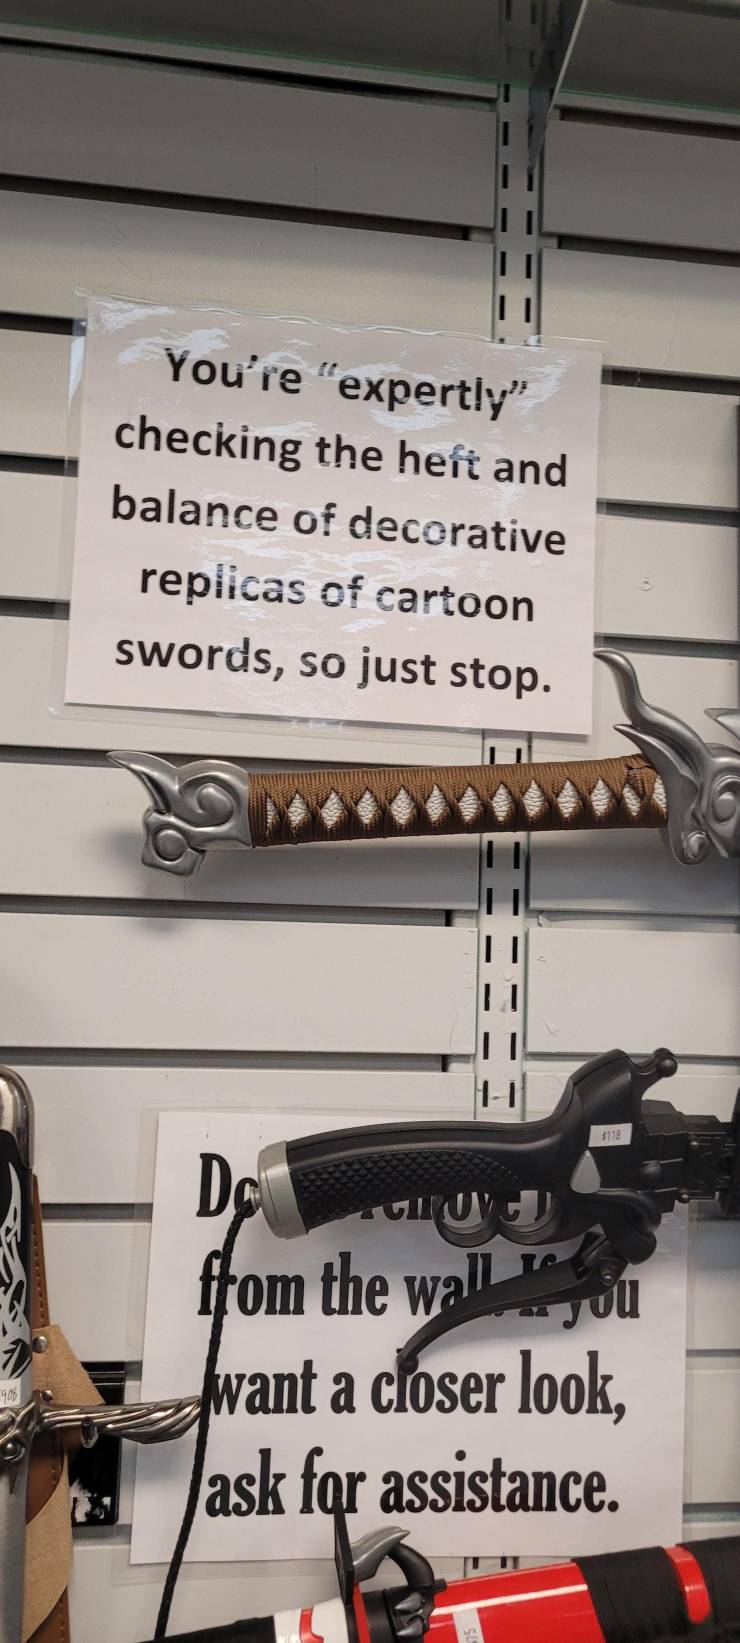 fun randoms - funny photos - You're "expertly" checking the heft and balance of decorative replicas of cartoon swords, so just stop. $118 Utov Dc ffom the walls ull want a closer look, ask for assistance. 908